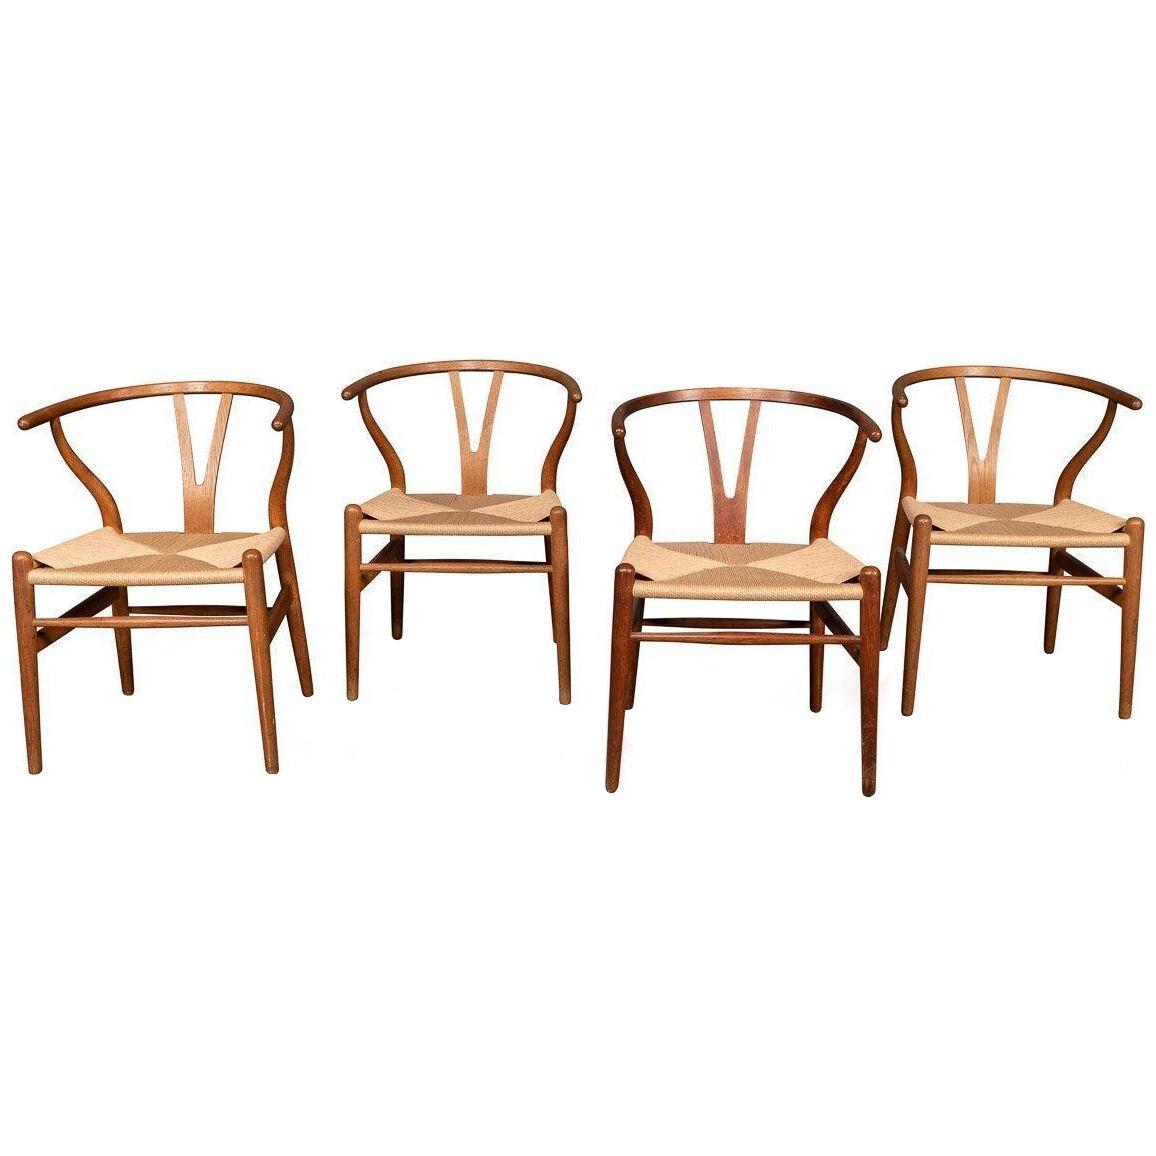 Iconic 20th Century Four Wishbone Dining Chairs By Hans J Wegners c.1960